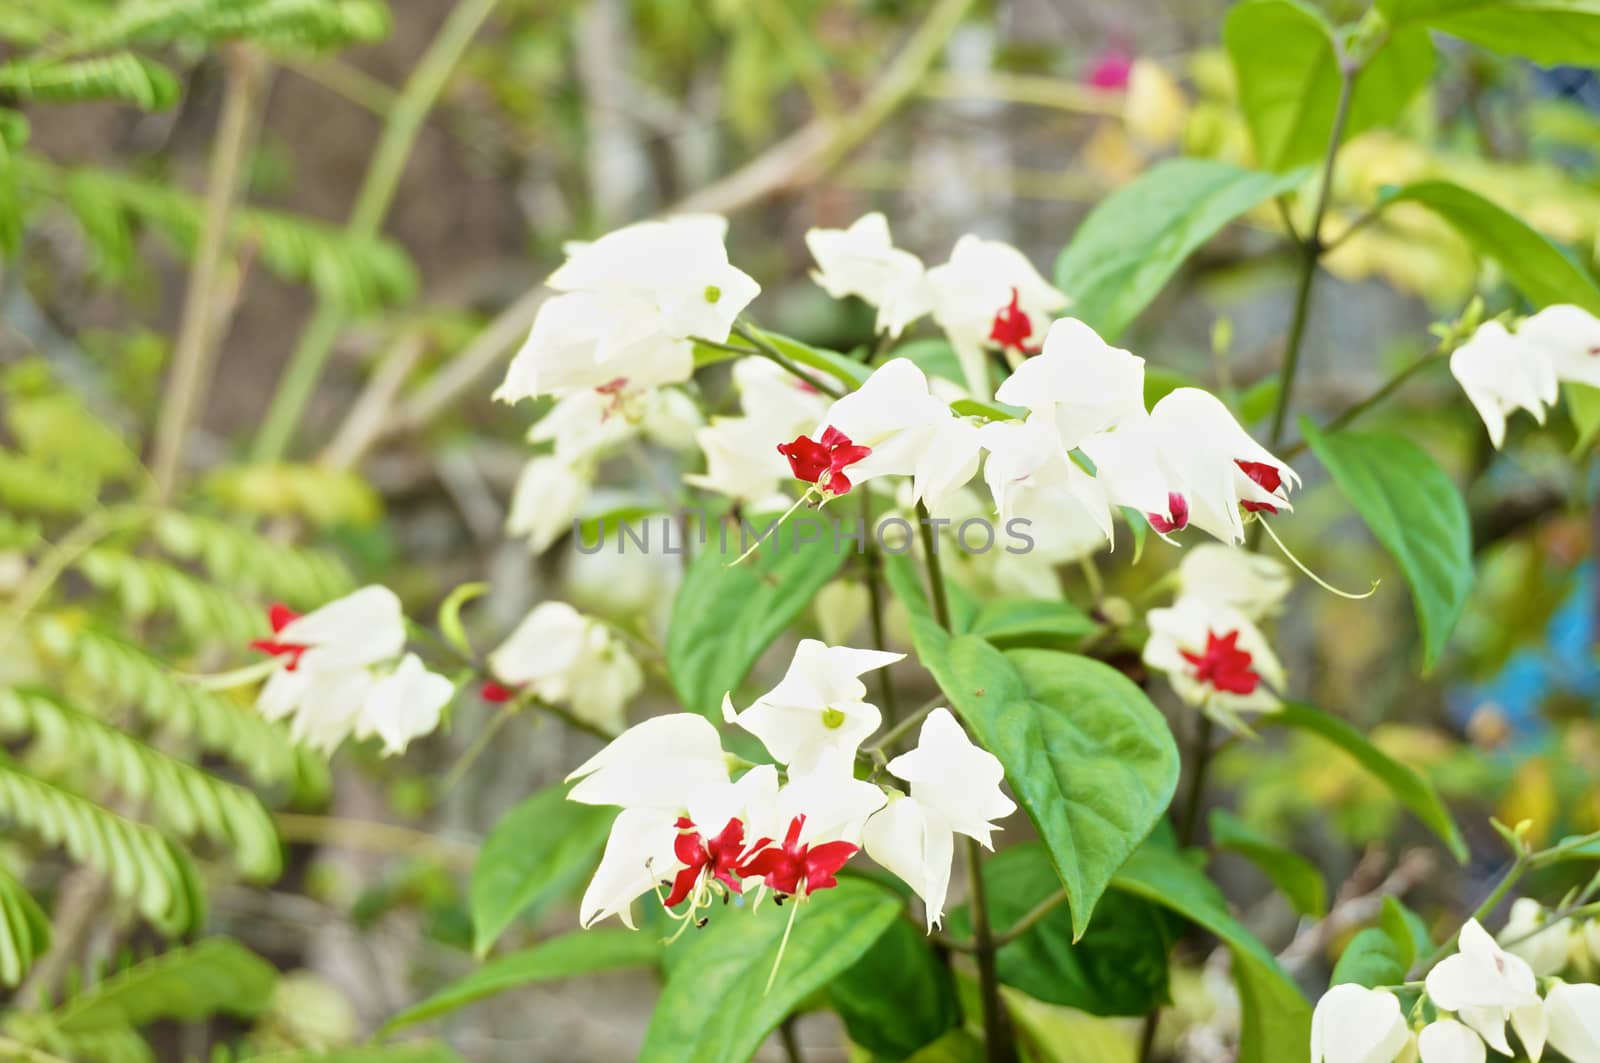 Clerodendrum thomsoniae is small white and red flower by eaglesky